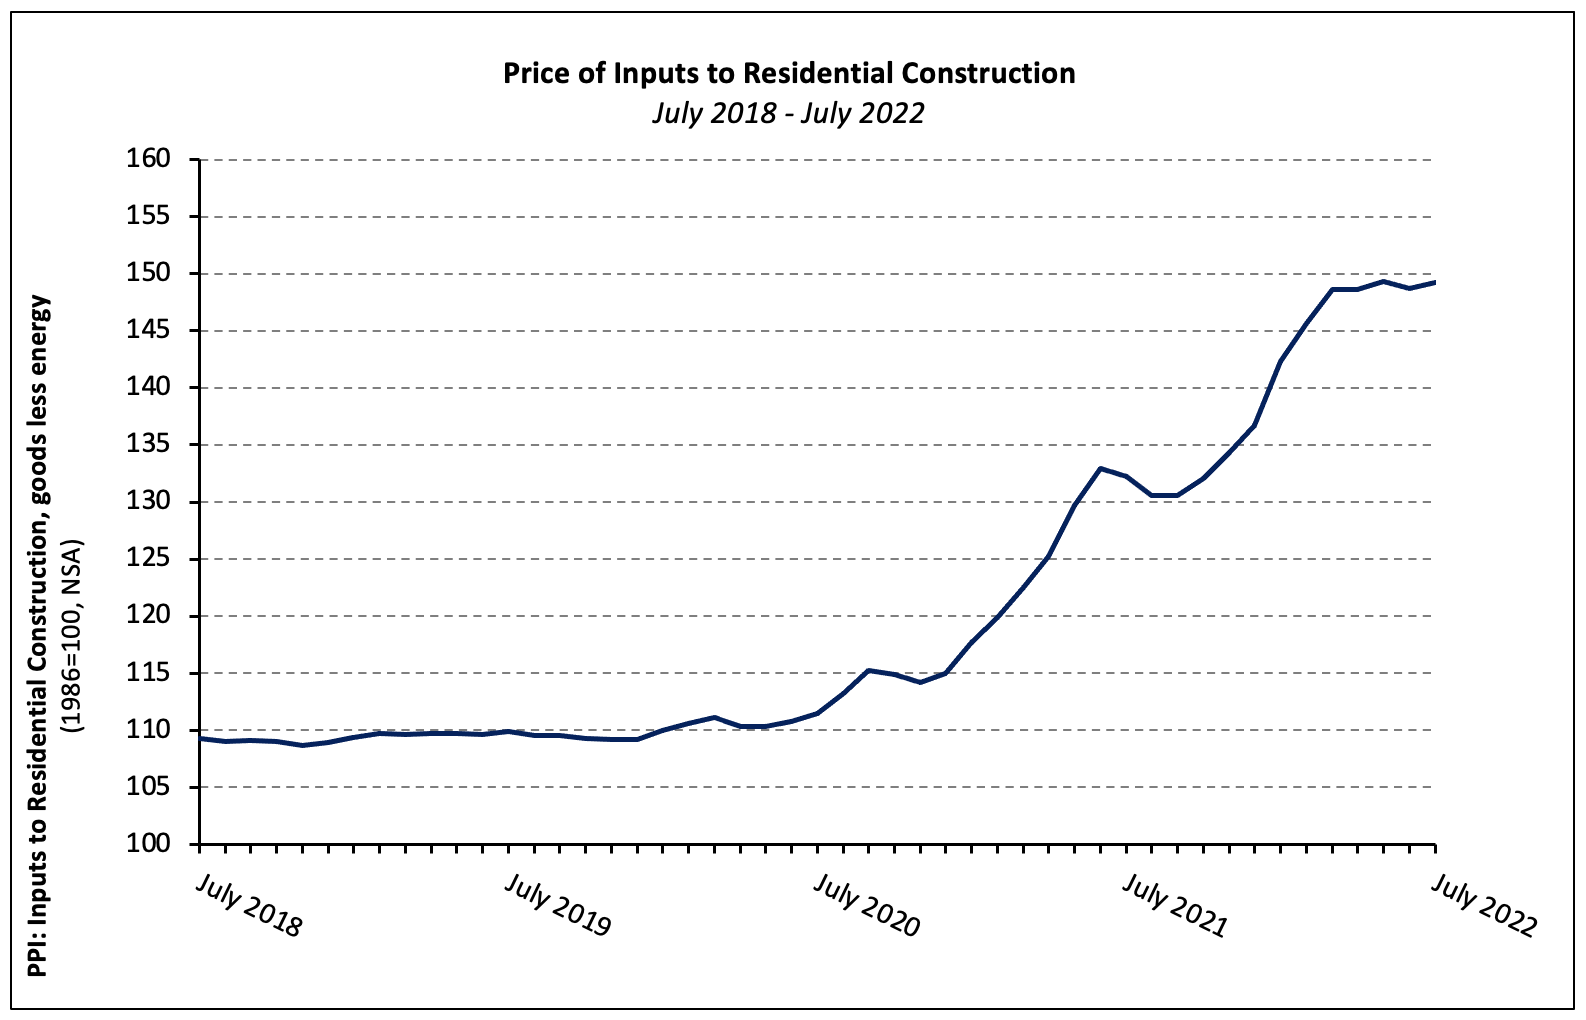 Building Material Prices Experience Large YTD Increases Through July